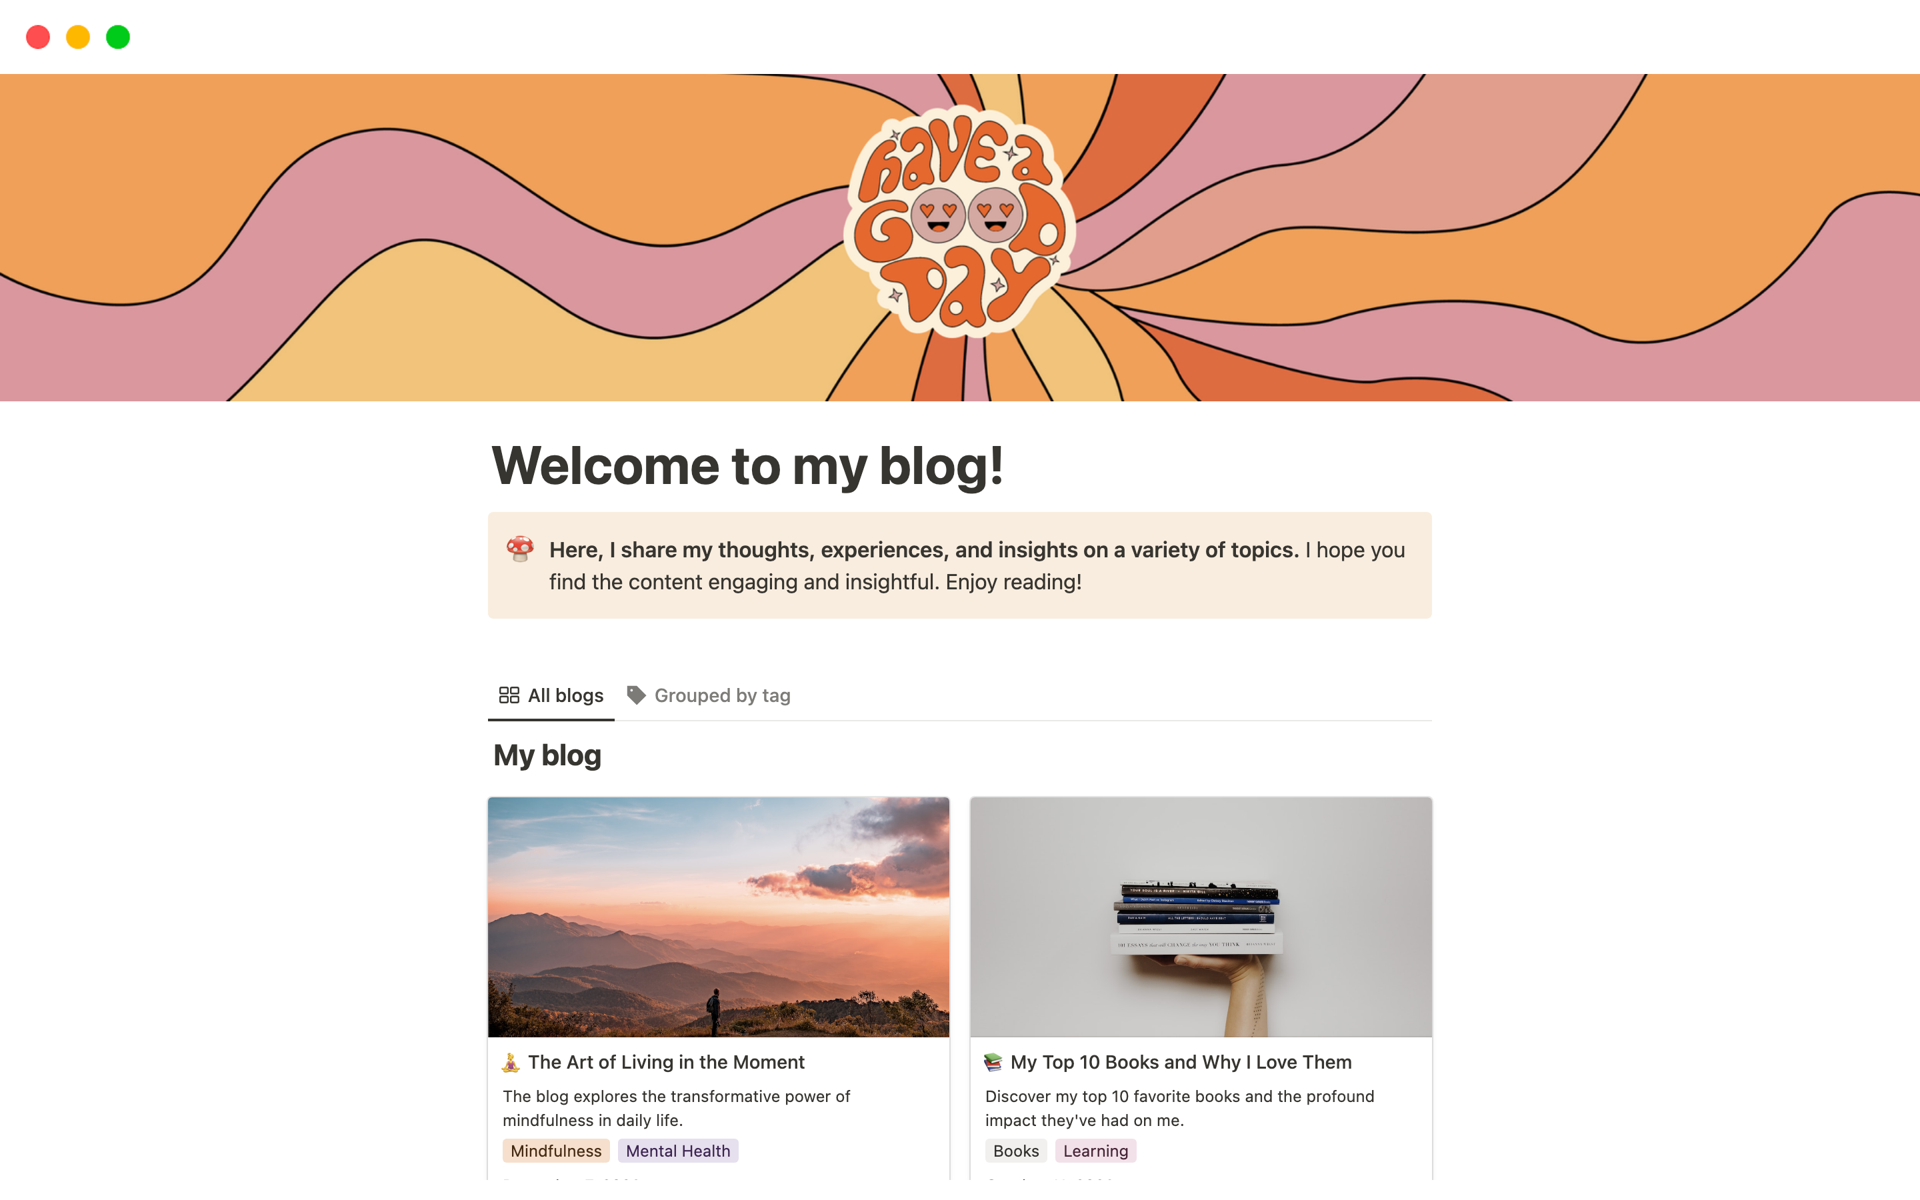 A versatile blog template, perfect for expressing your unique voice and publishing to the web with ease.